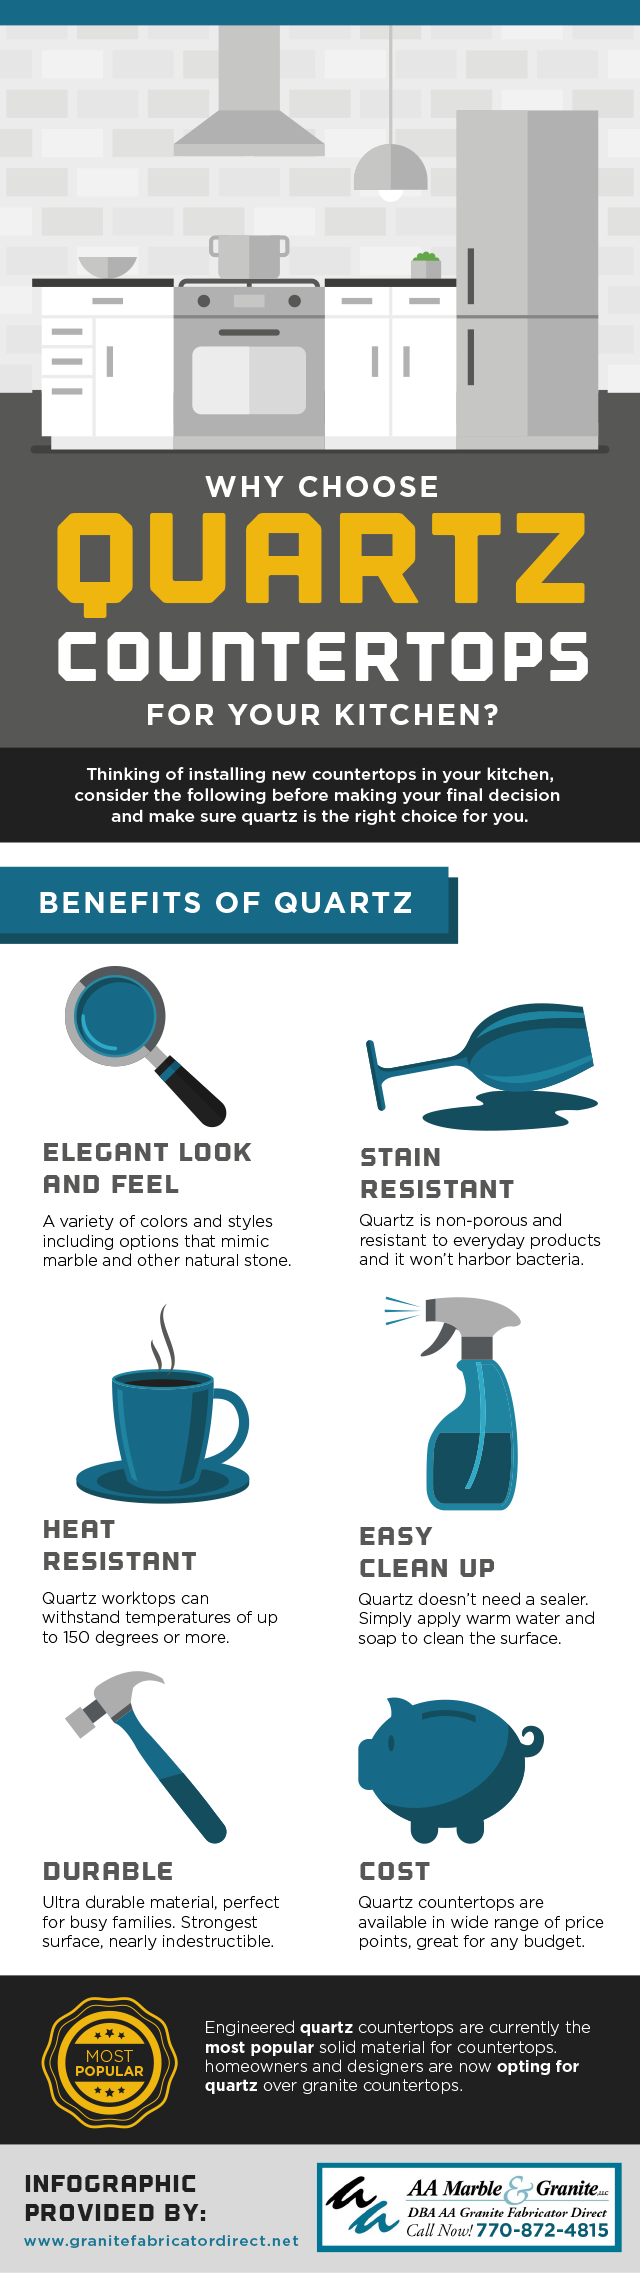 why choose quartz countertops for your kitchen infographic